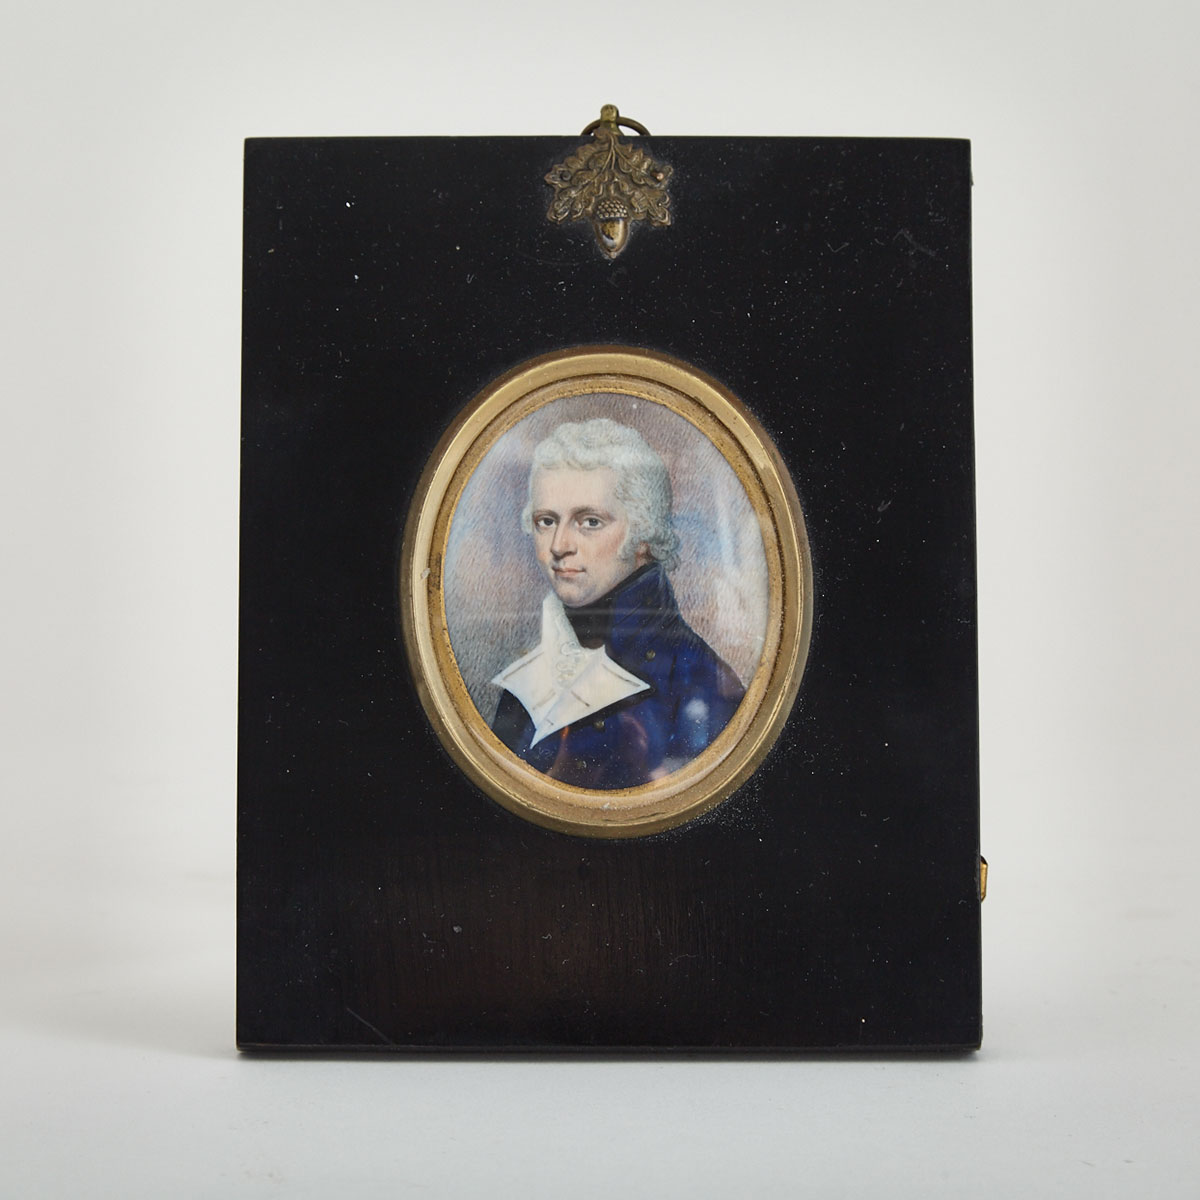 English School Portrait Miniature of an Officer, early 19th century